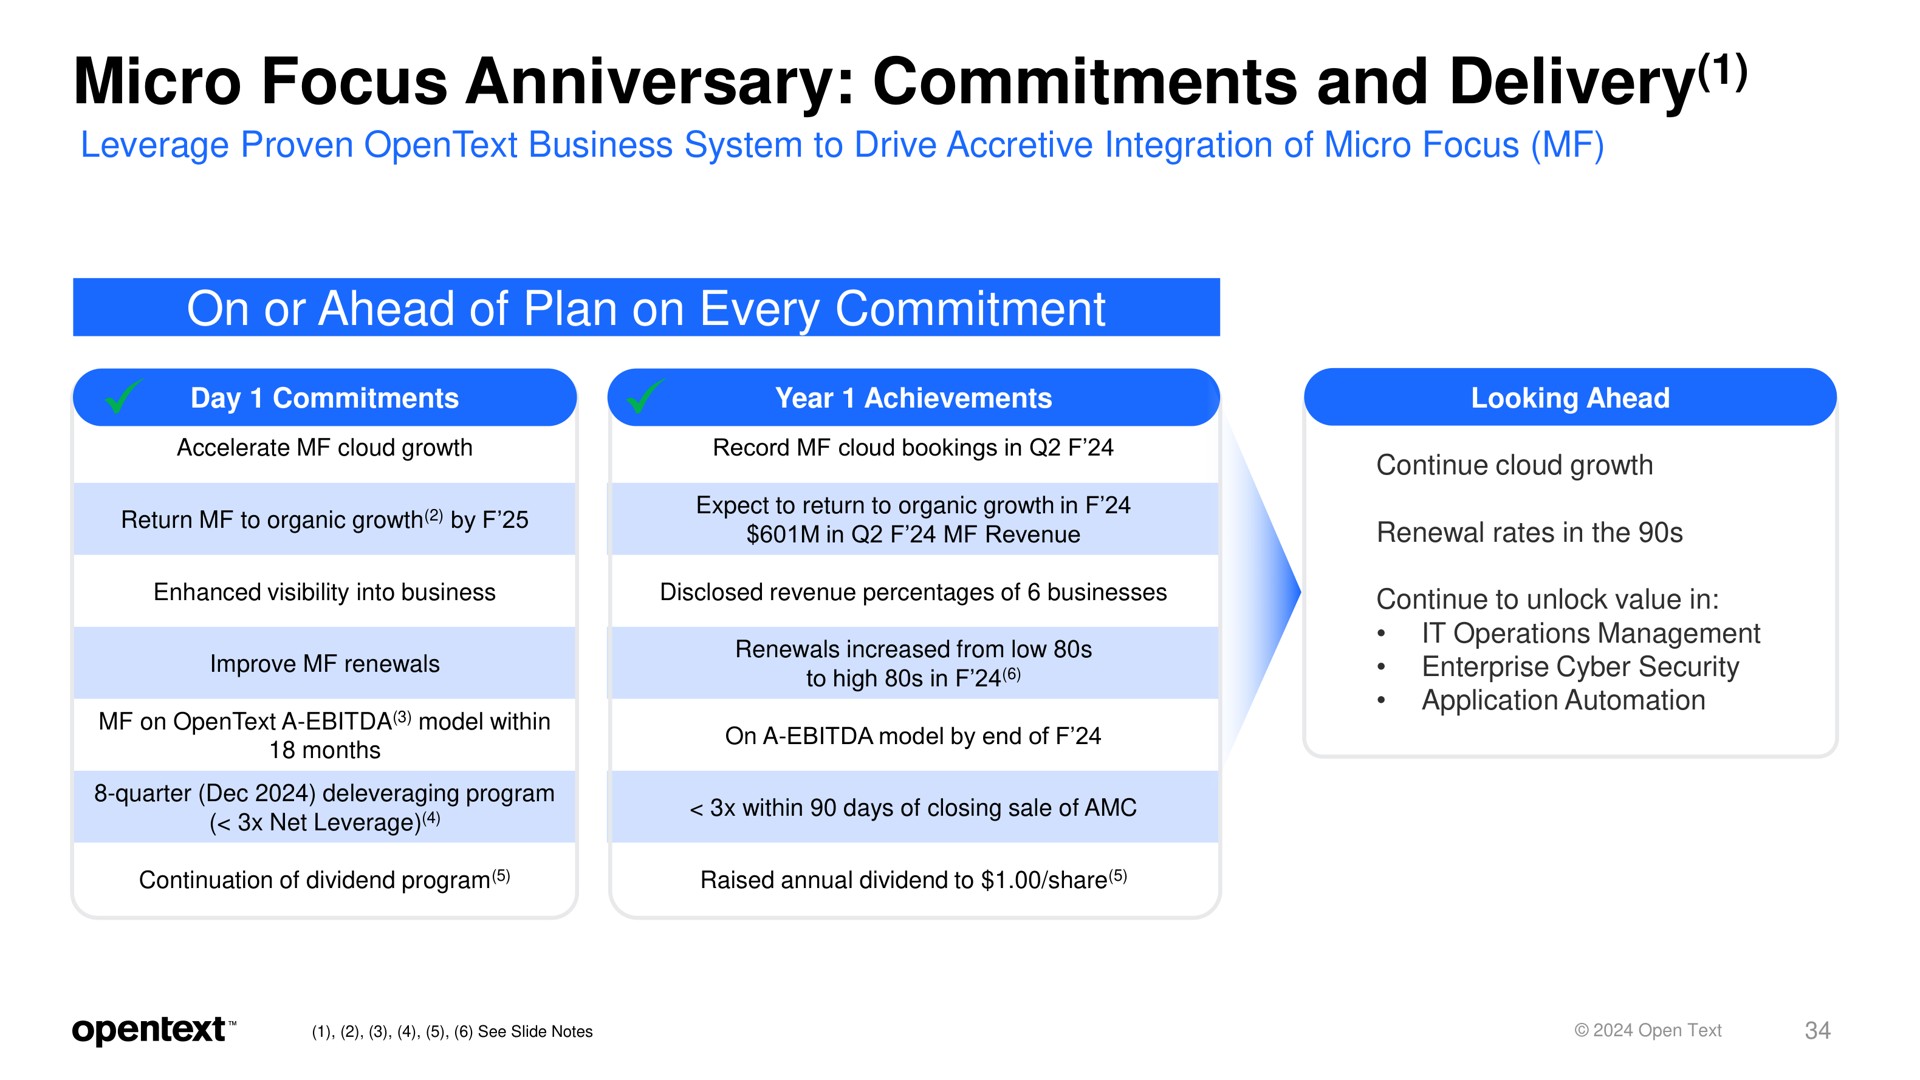 micro focus anniversary commitments and delivery on or ahead of plan on every commitment | OpenText